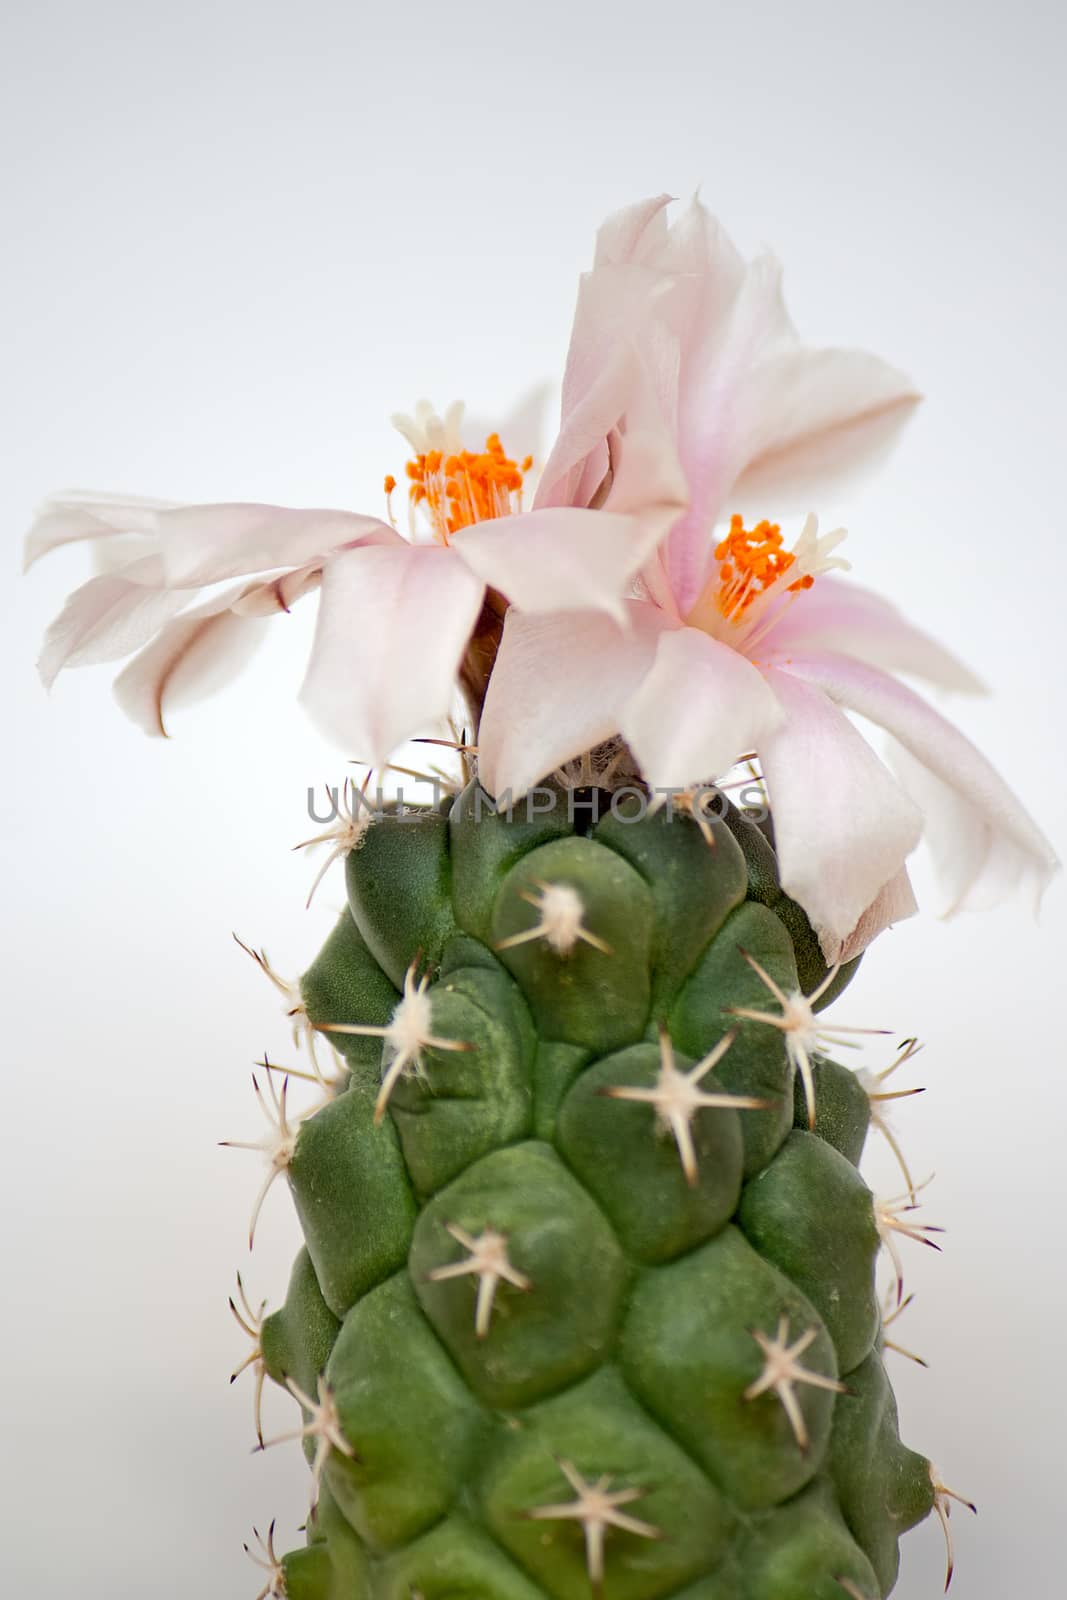 Cactus with flower  on dark background (Turbinicarpus).Image with shallow depth of field.